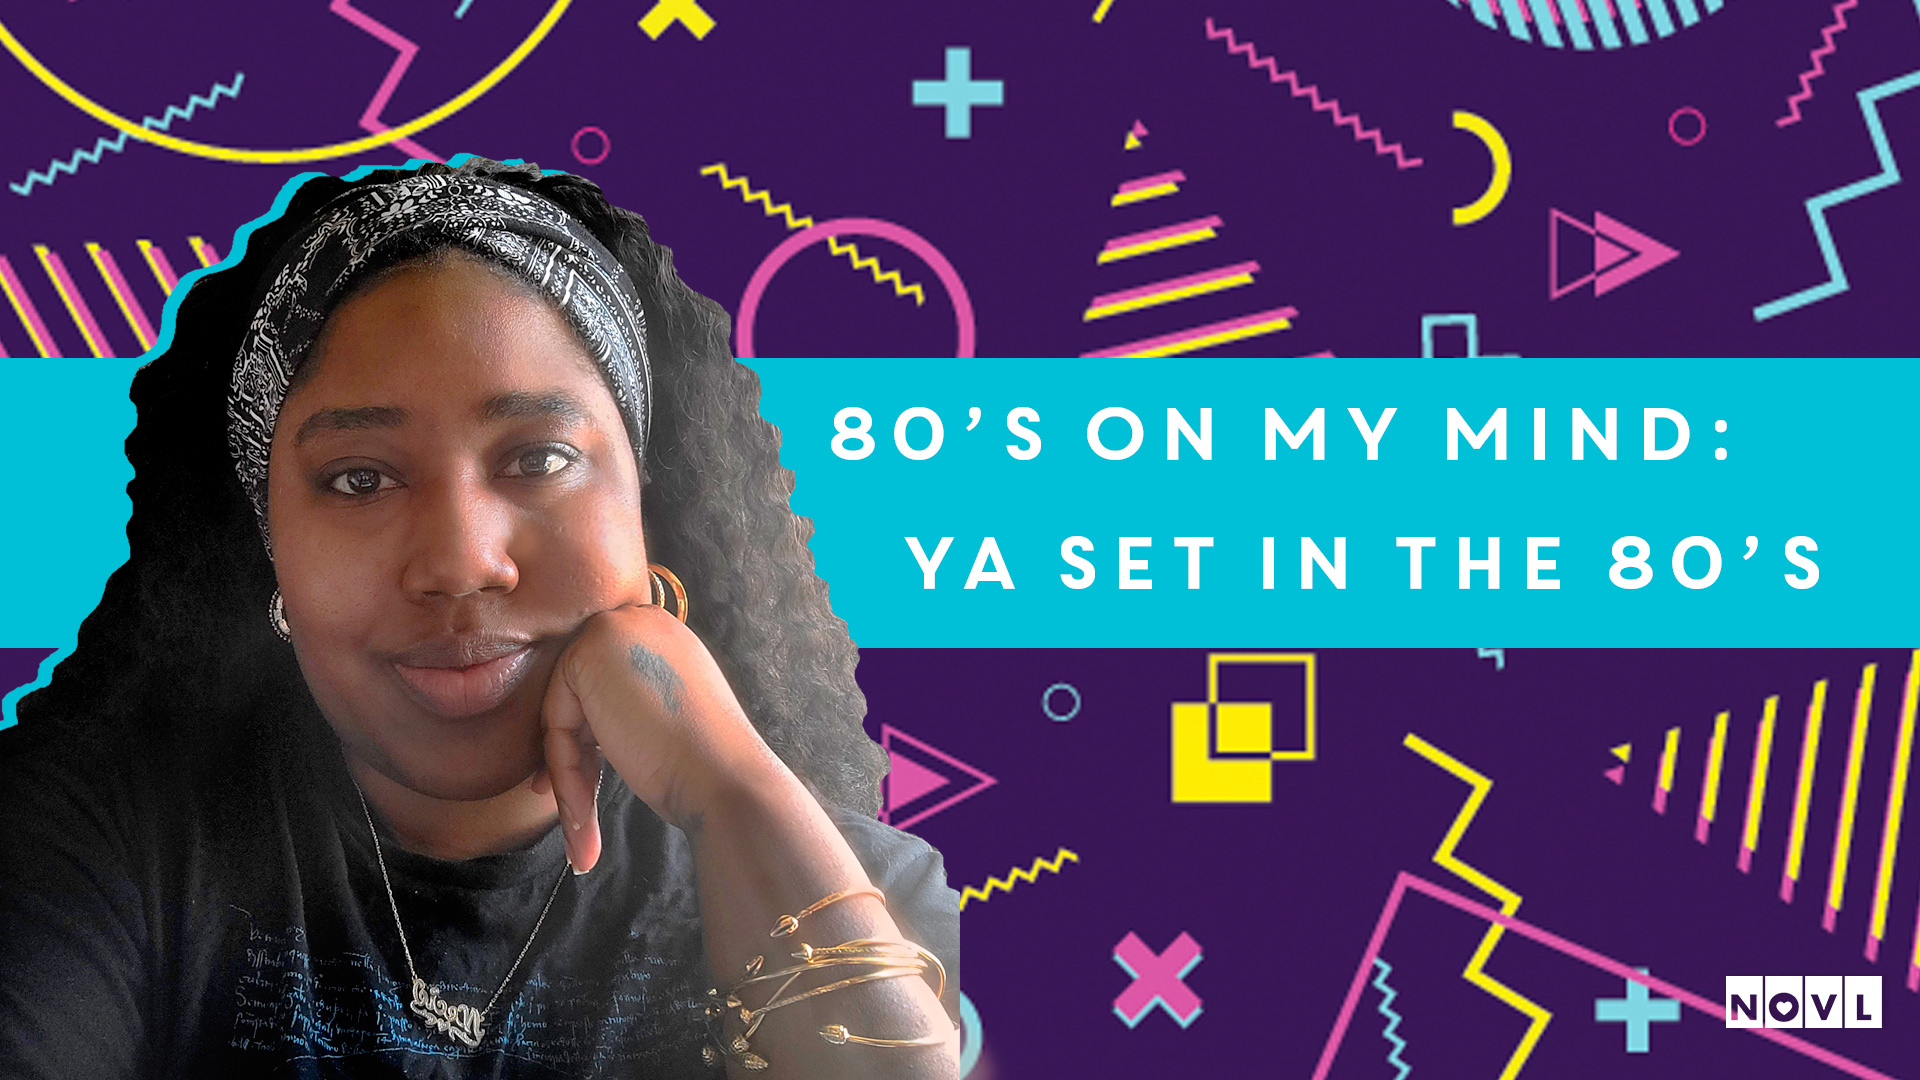 The NOVL Blog, Featured Image for Article: 80's On My Mind: YA set in the 80's